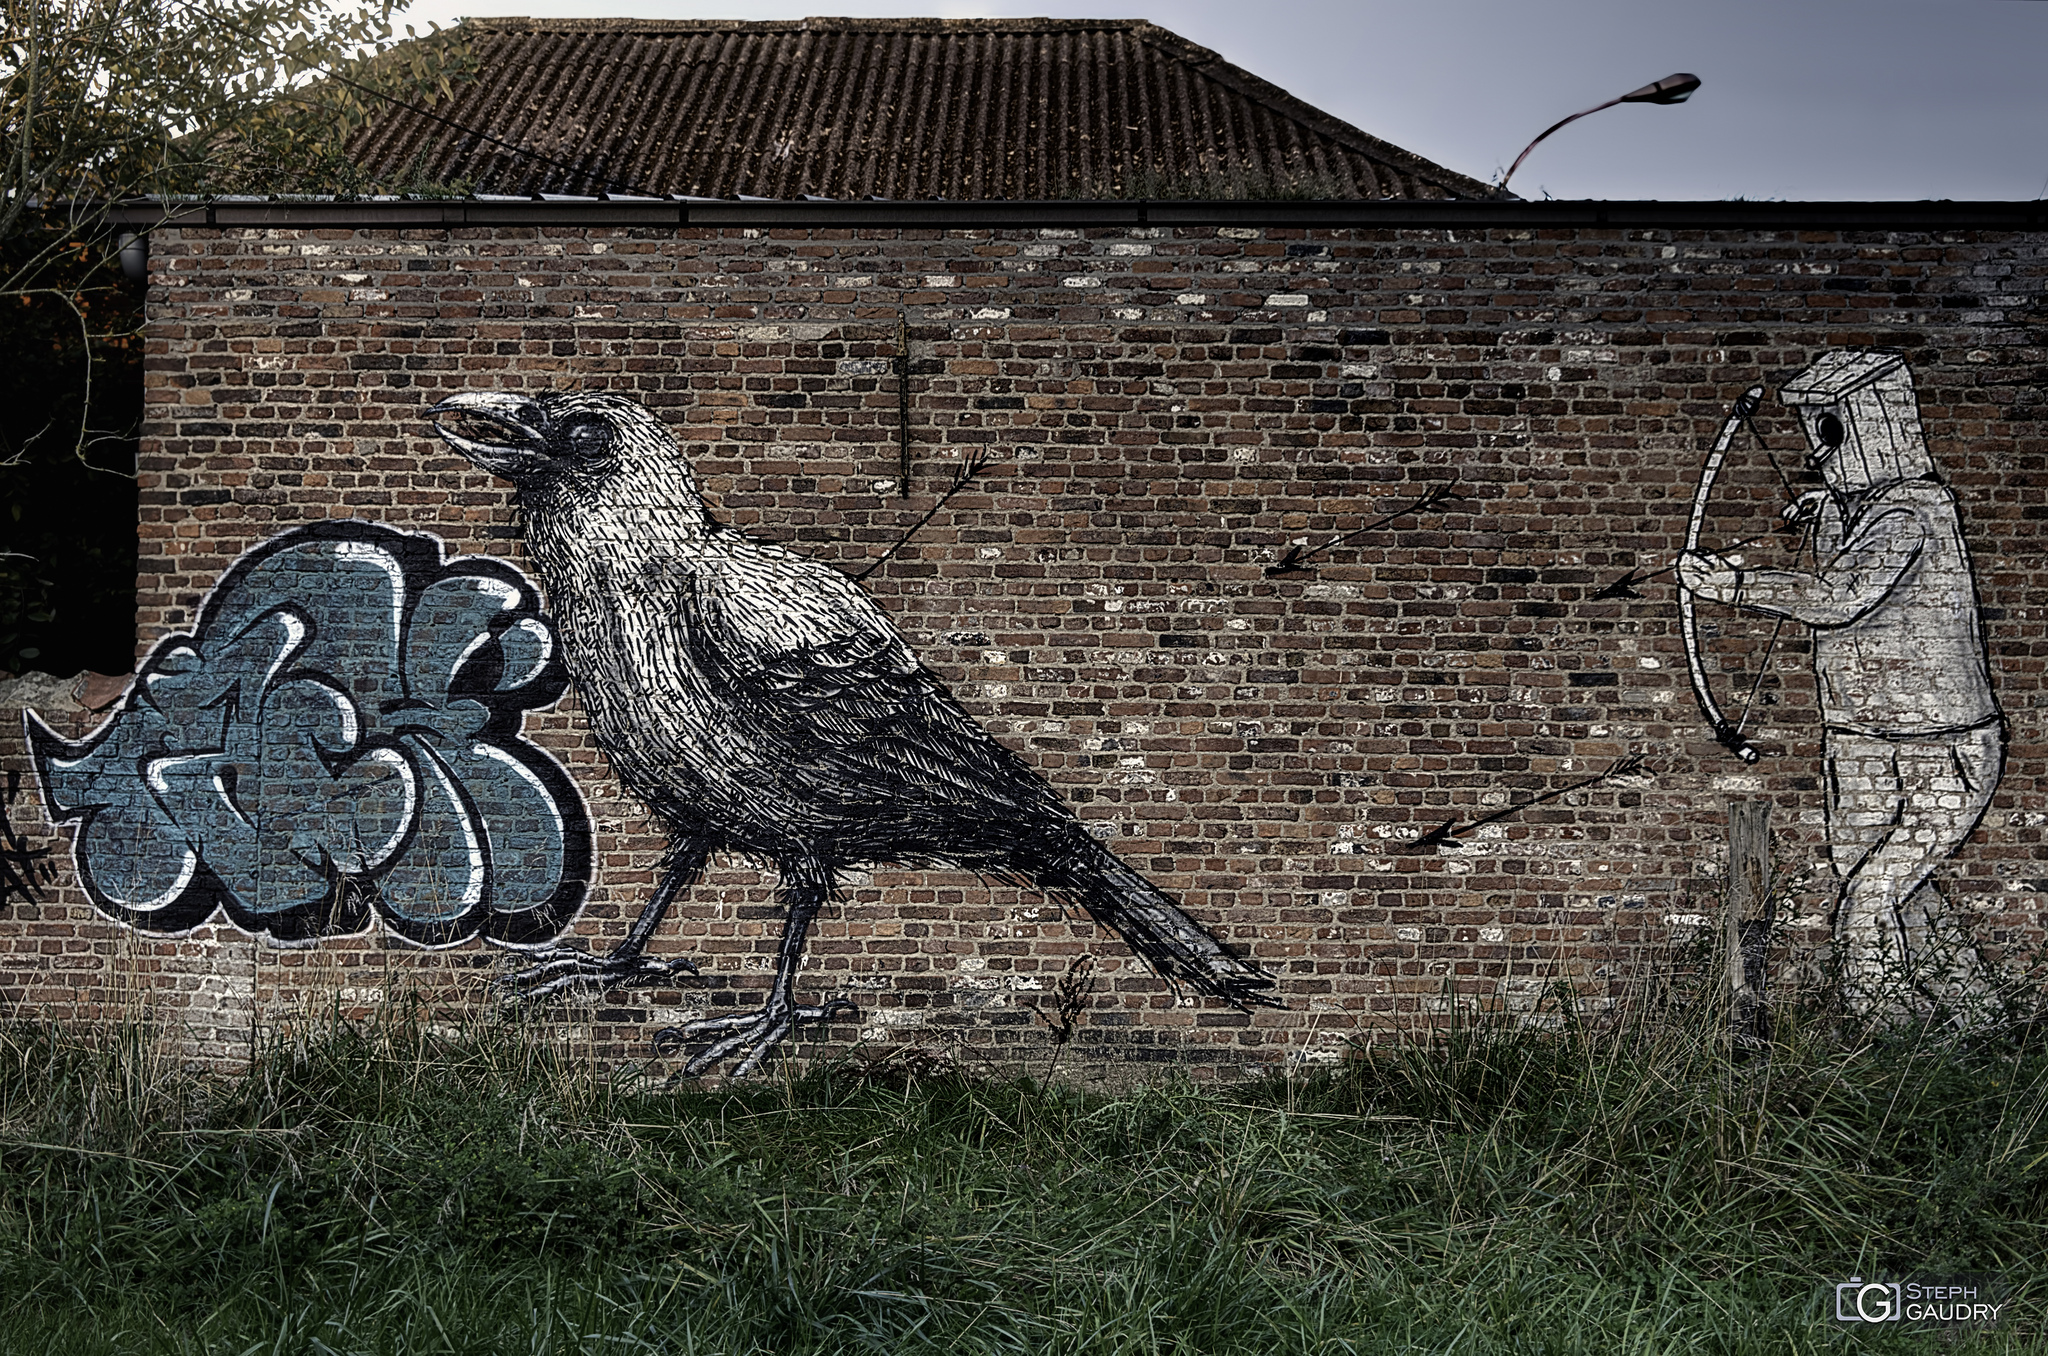 Doel, Hunting by Roa [Click to start slideshow]